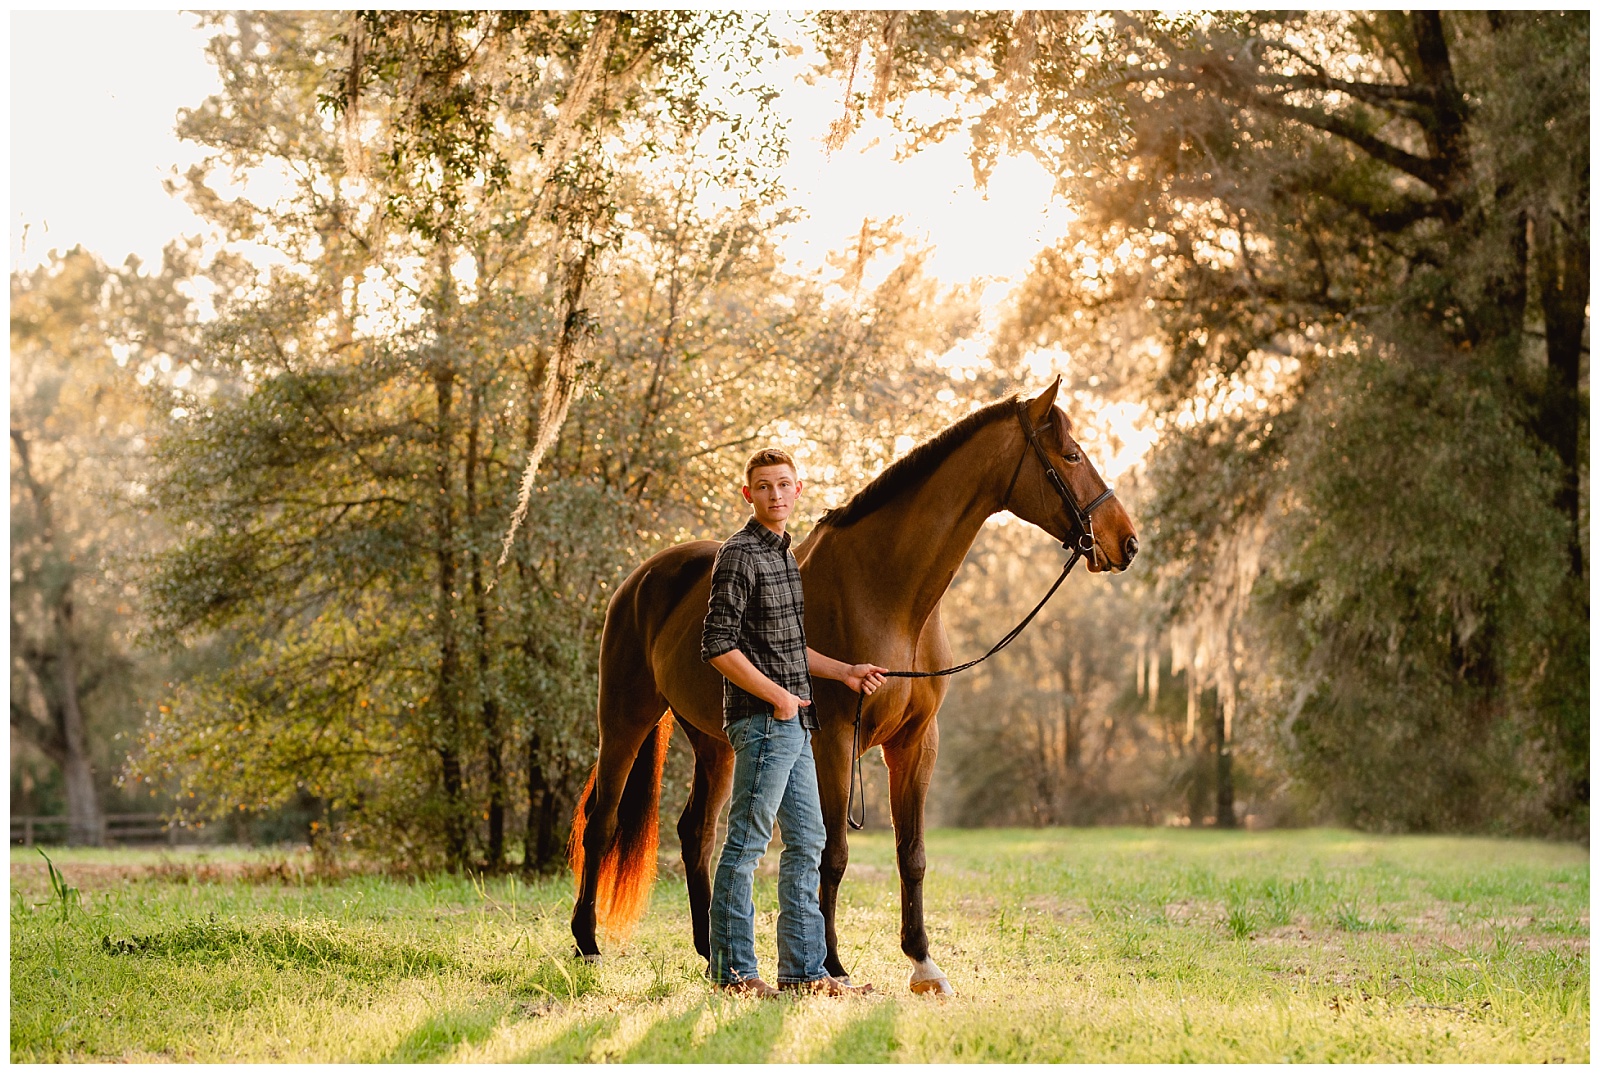 Senior photography in Tallahassee, Florida during sunset with senior boy and his hobby, horseback riding.